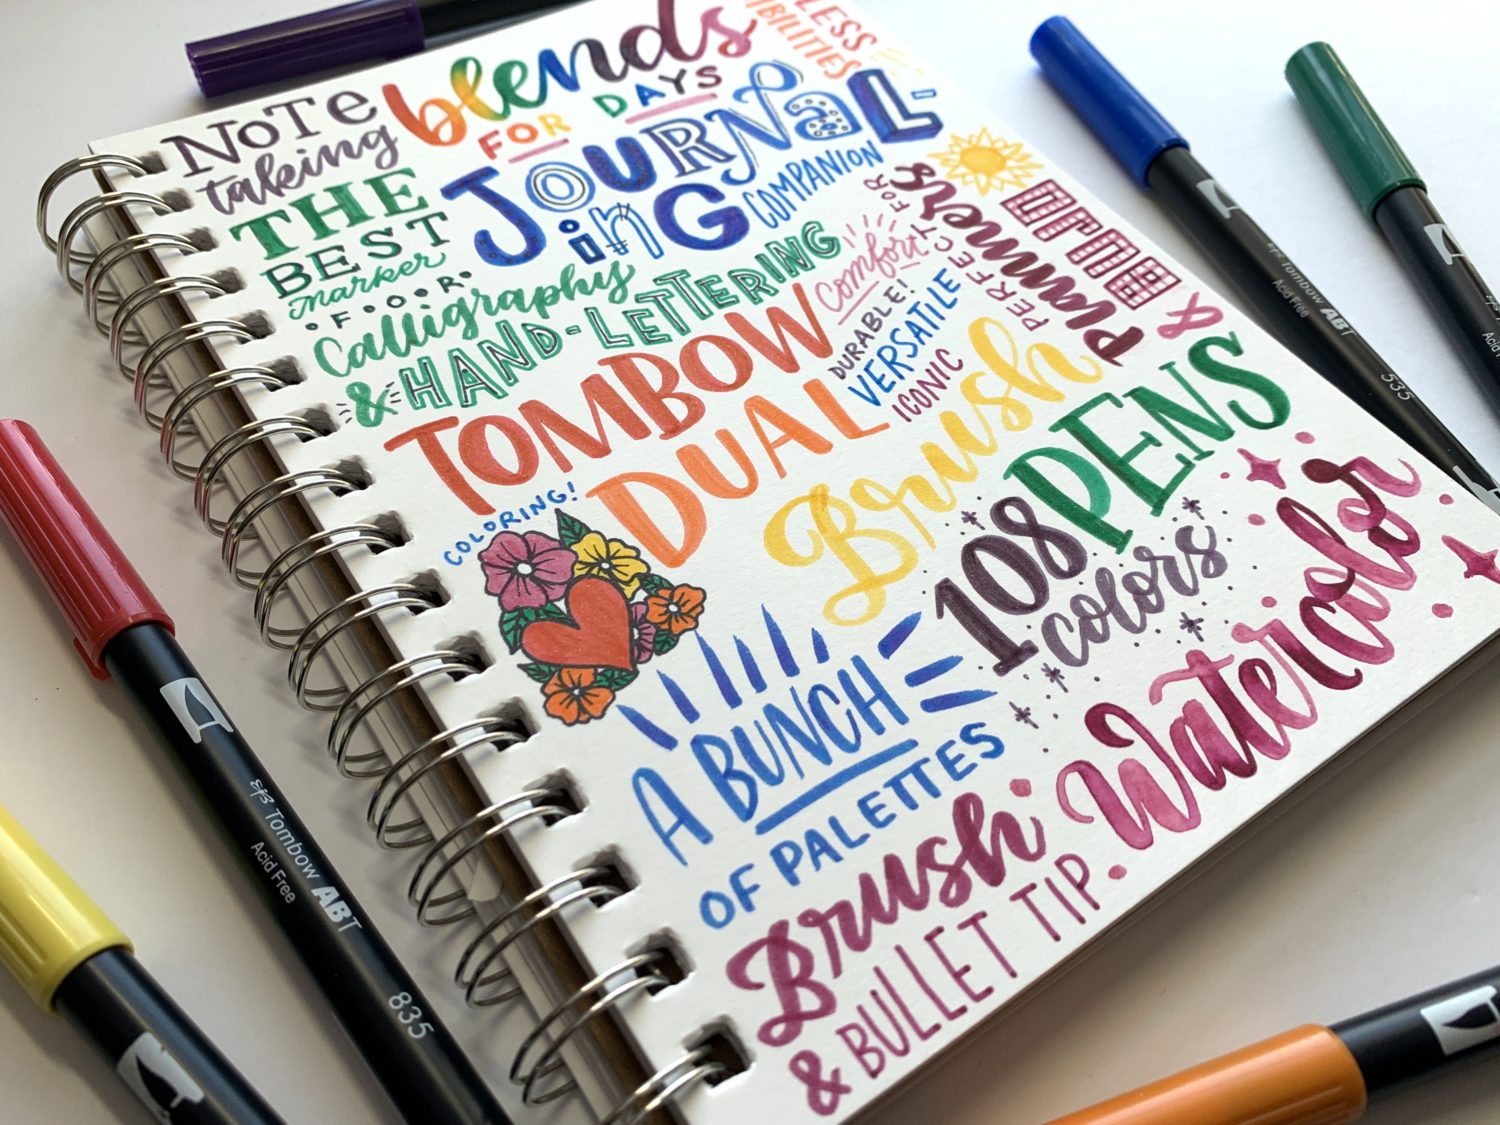 How to use Tombow brush pens for hand lettering - The Pen Company Blog